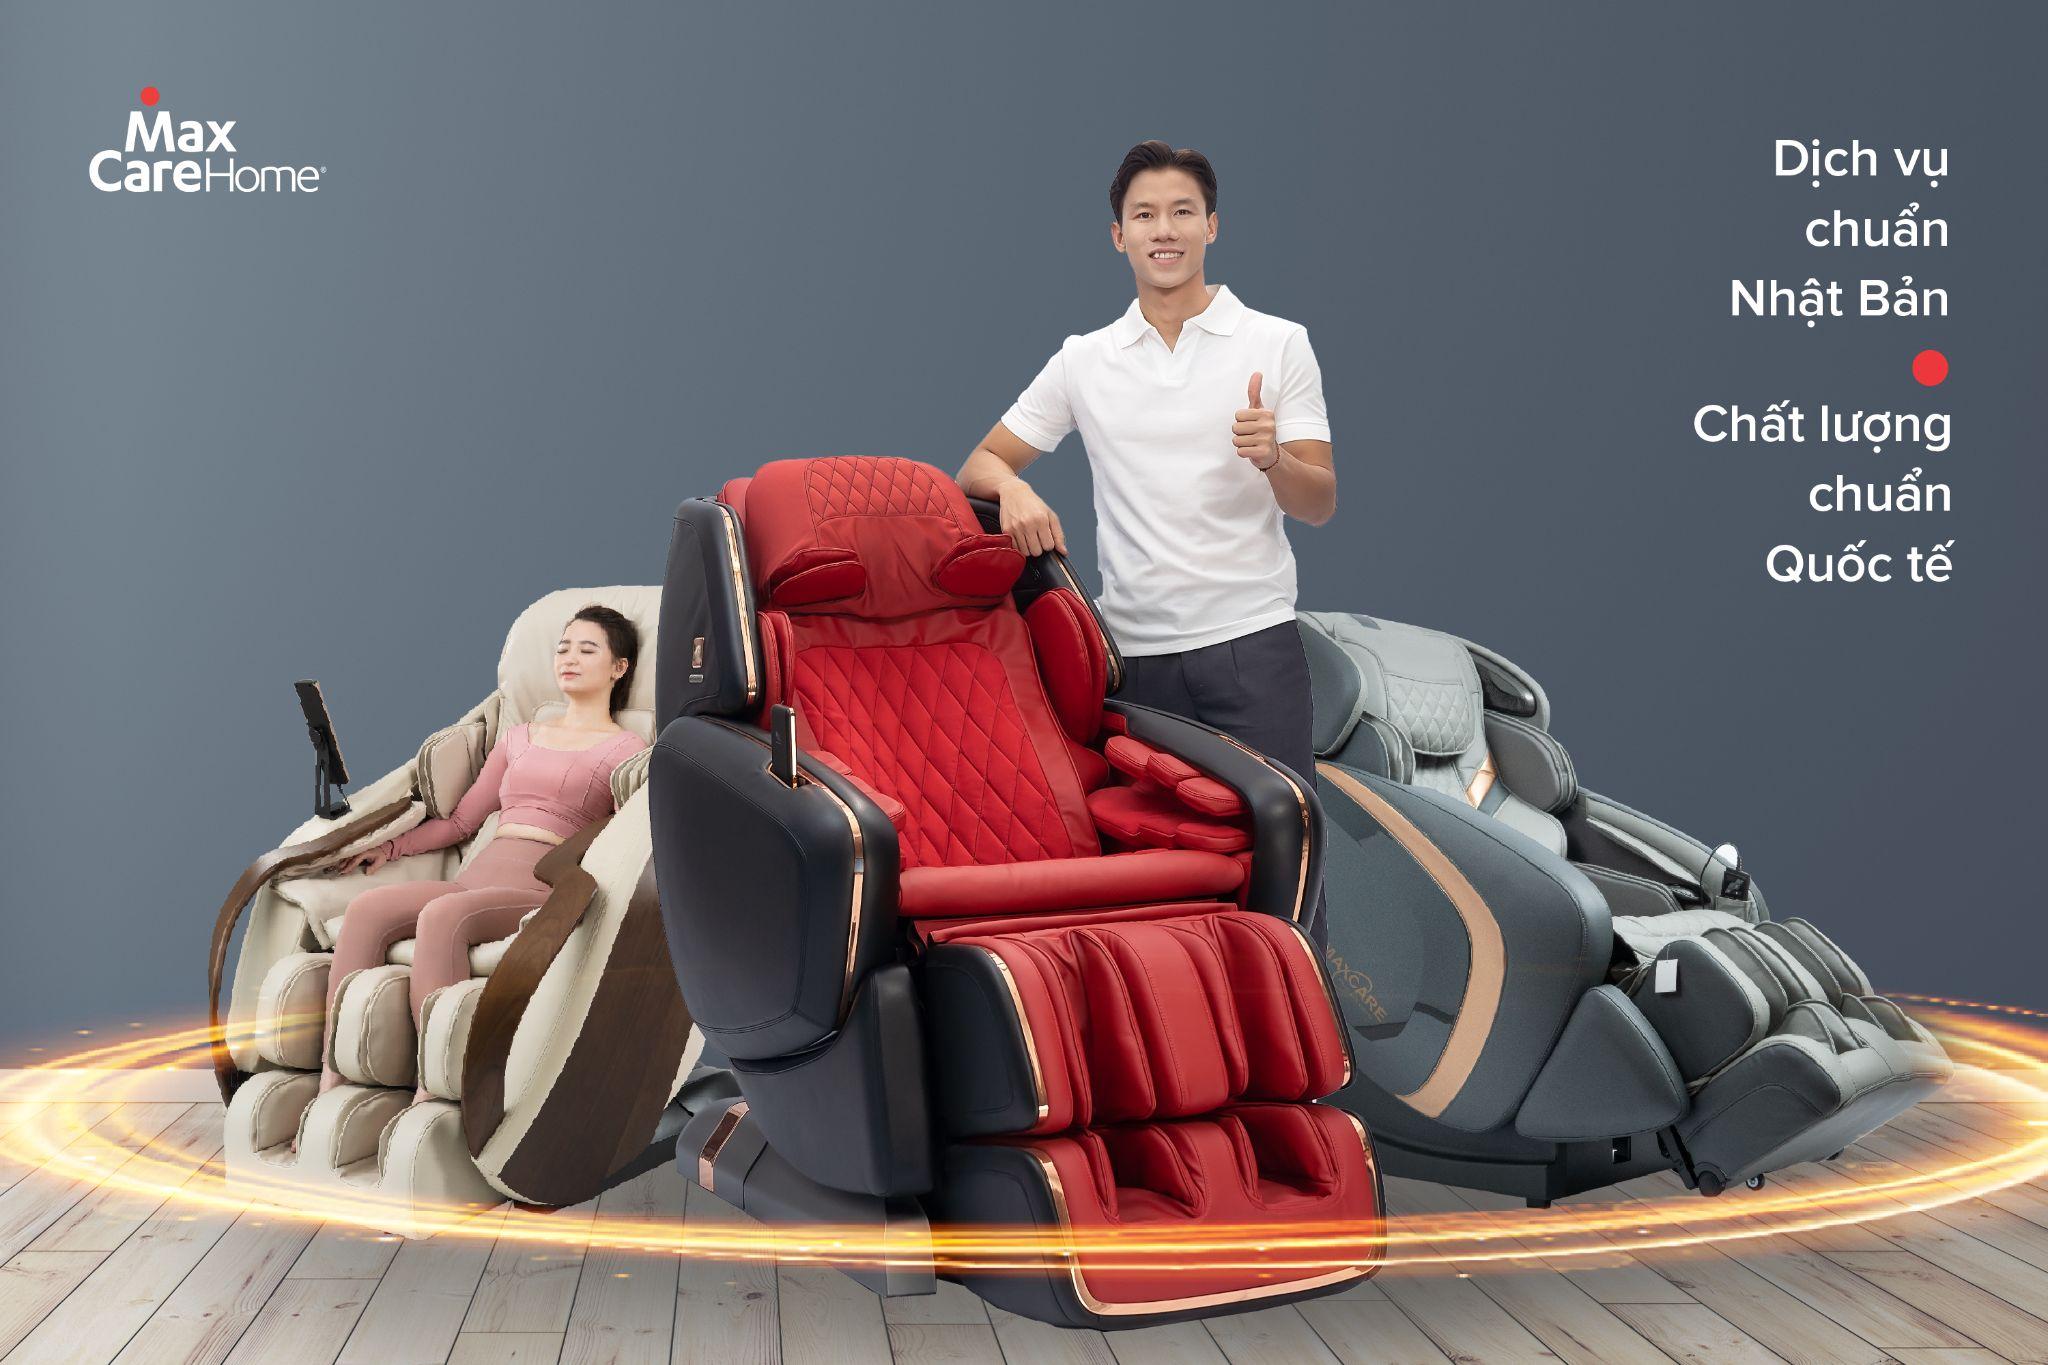 5 tips to buy luxury - standard - genuine massage chairs from MaxCare Home - 2